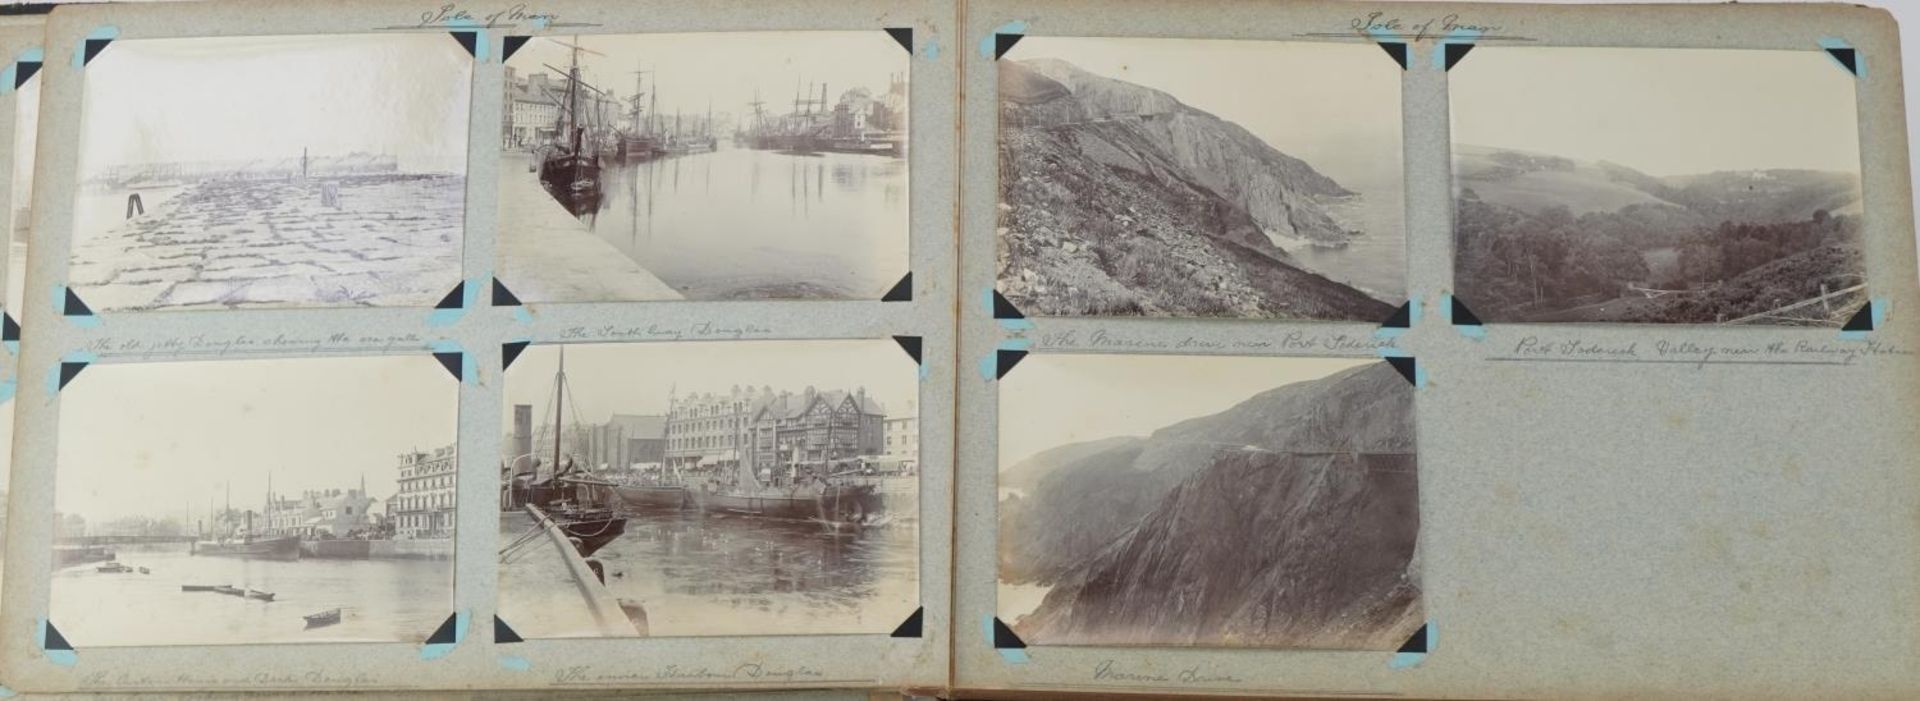 Early 20th century black and white photographs relating to the Isle of Man arranged in an album - Image 6 of 28